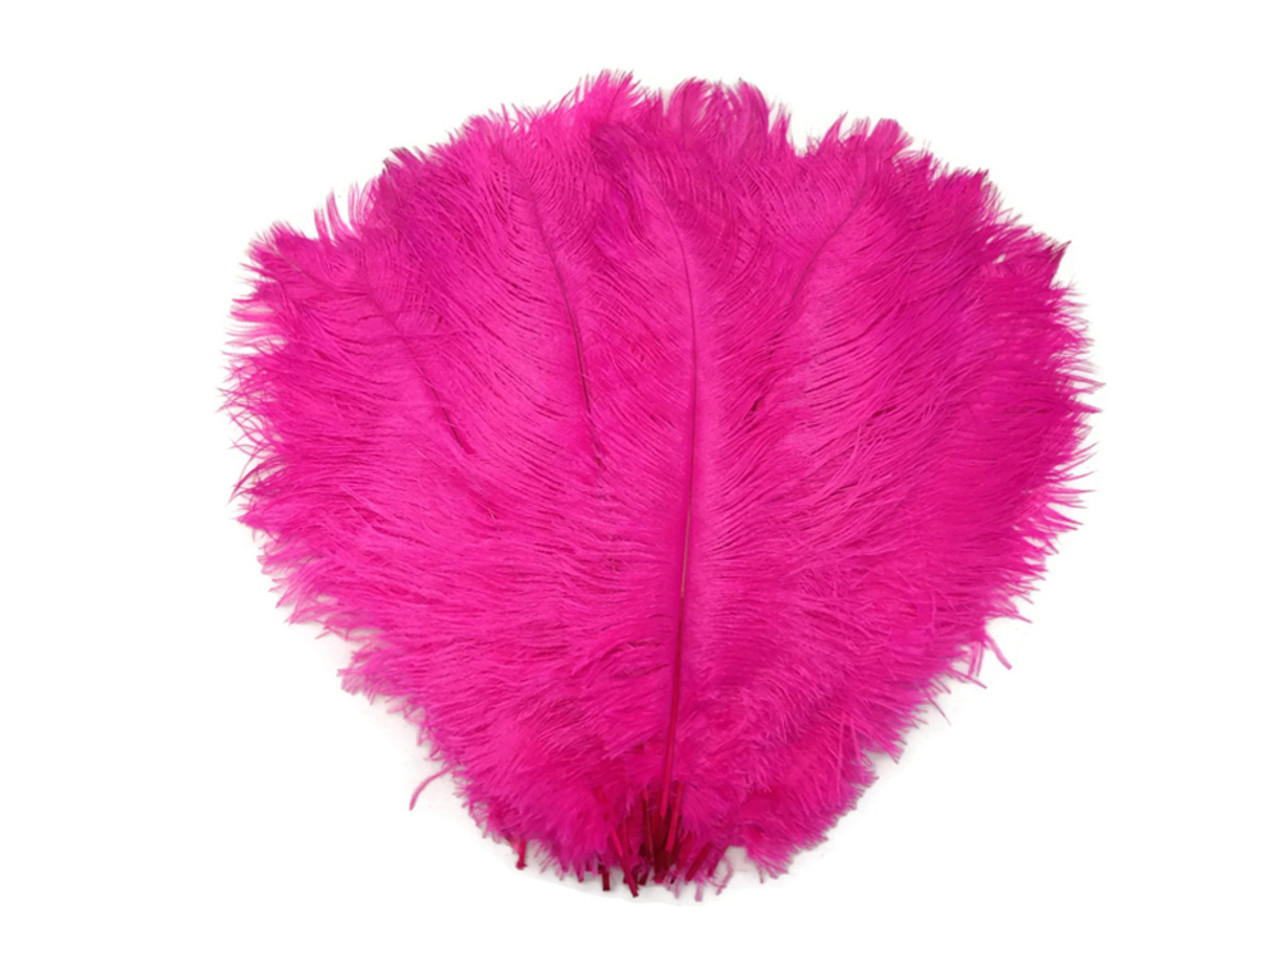 BULK 1/2lb Ostrich Feather Tail Plumes 15-20 (Fuchsia) for Sale